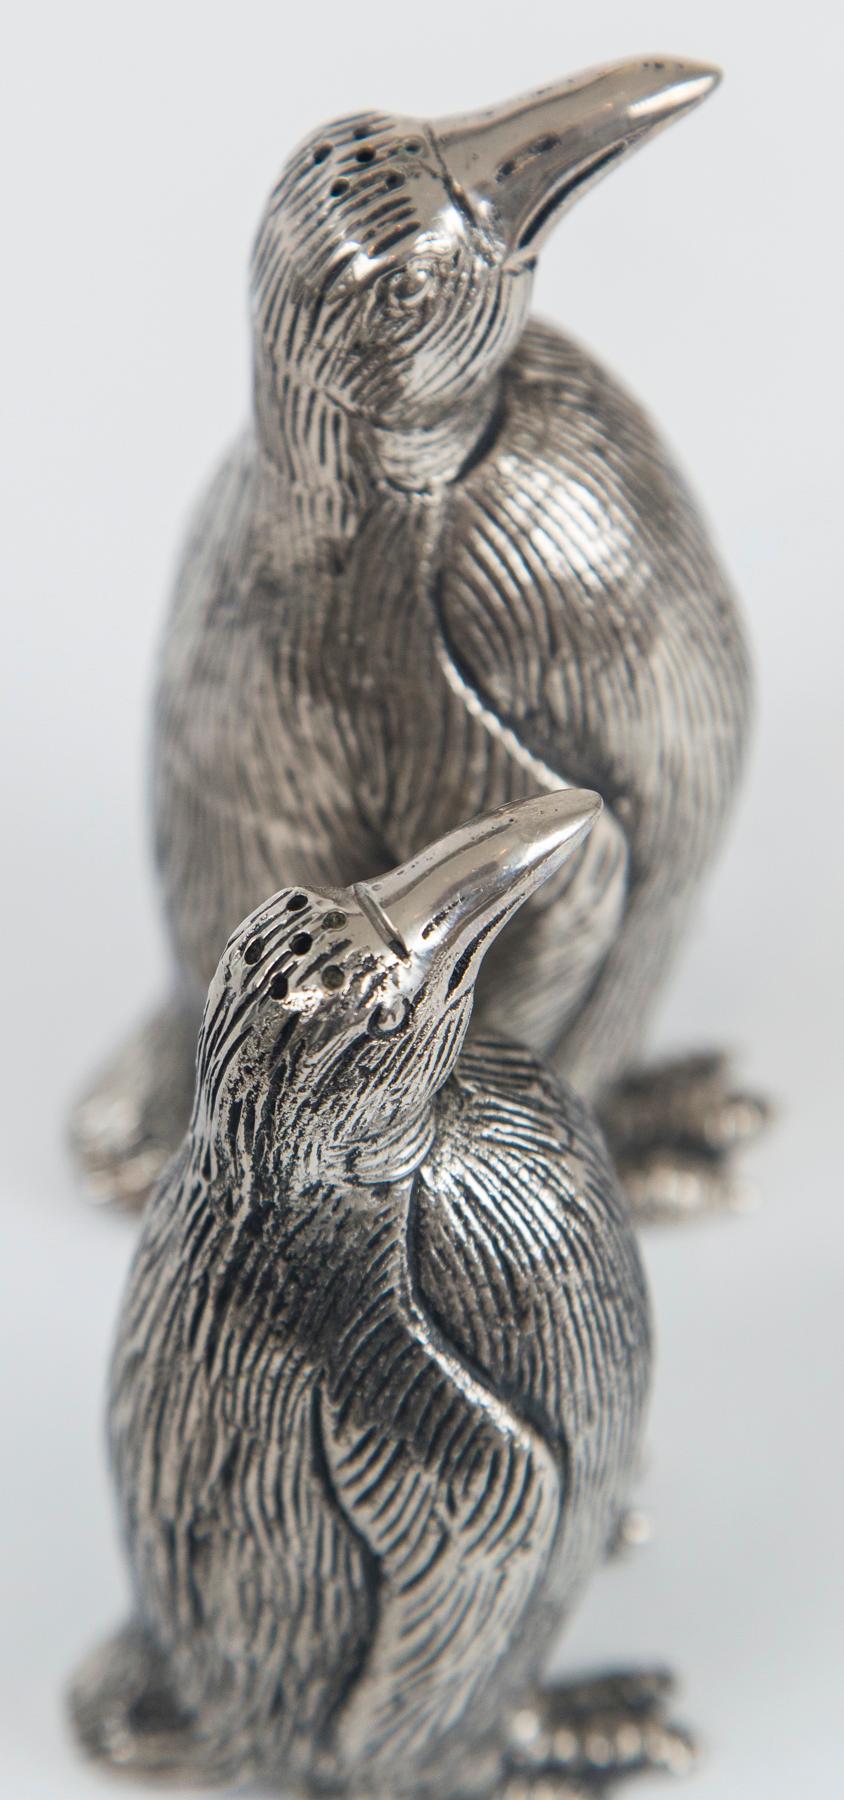 Italian Gucci Penguin Salt and Pepper Shakers, Silver Plate Over Pewter